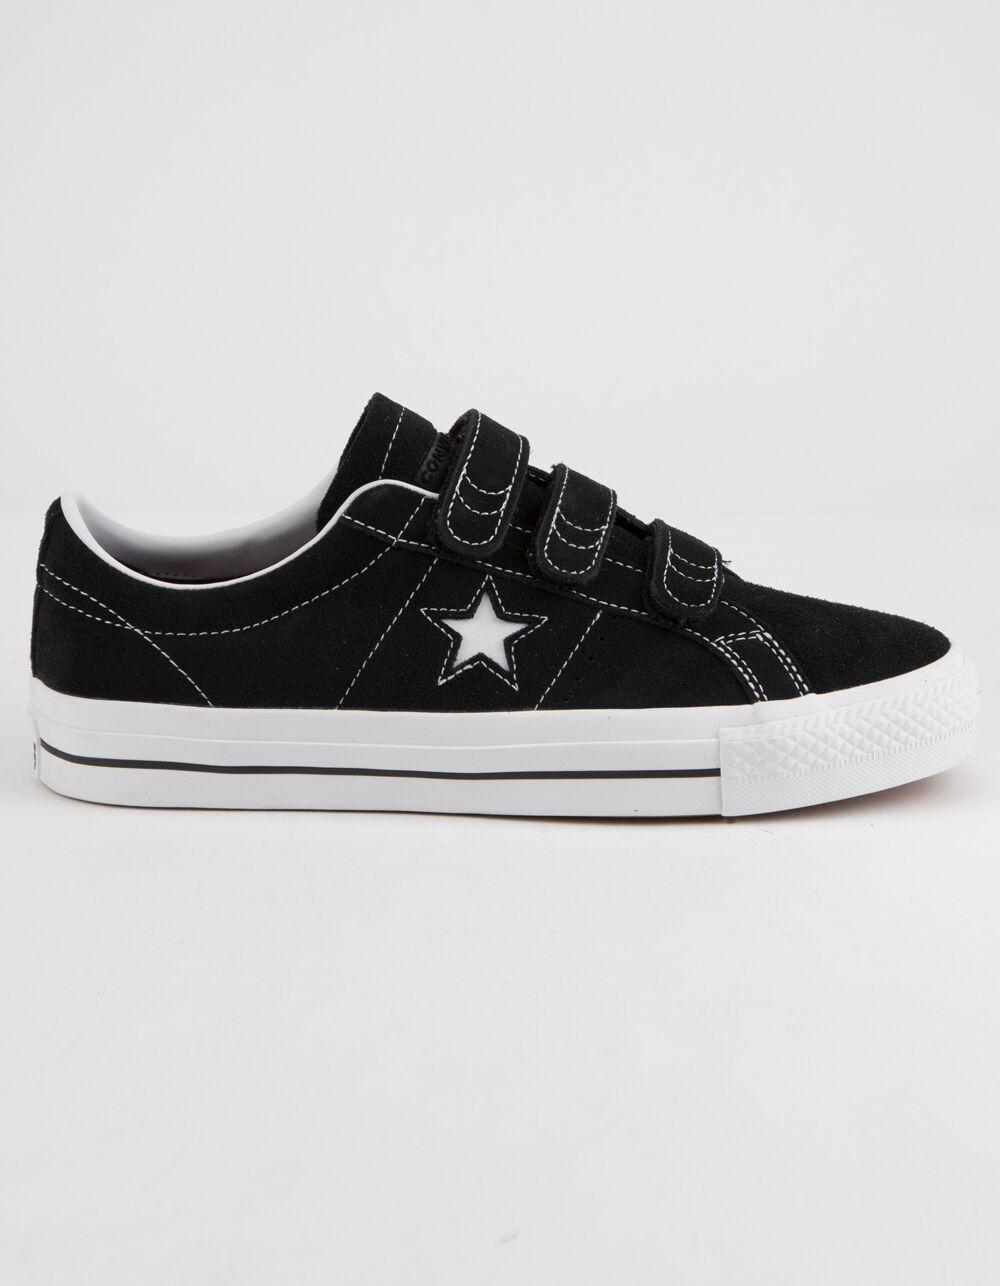 Converse Cons One Star Pro 3v Deals, SAVE 60%.